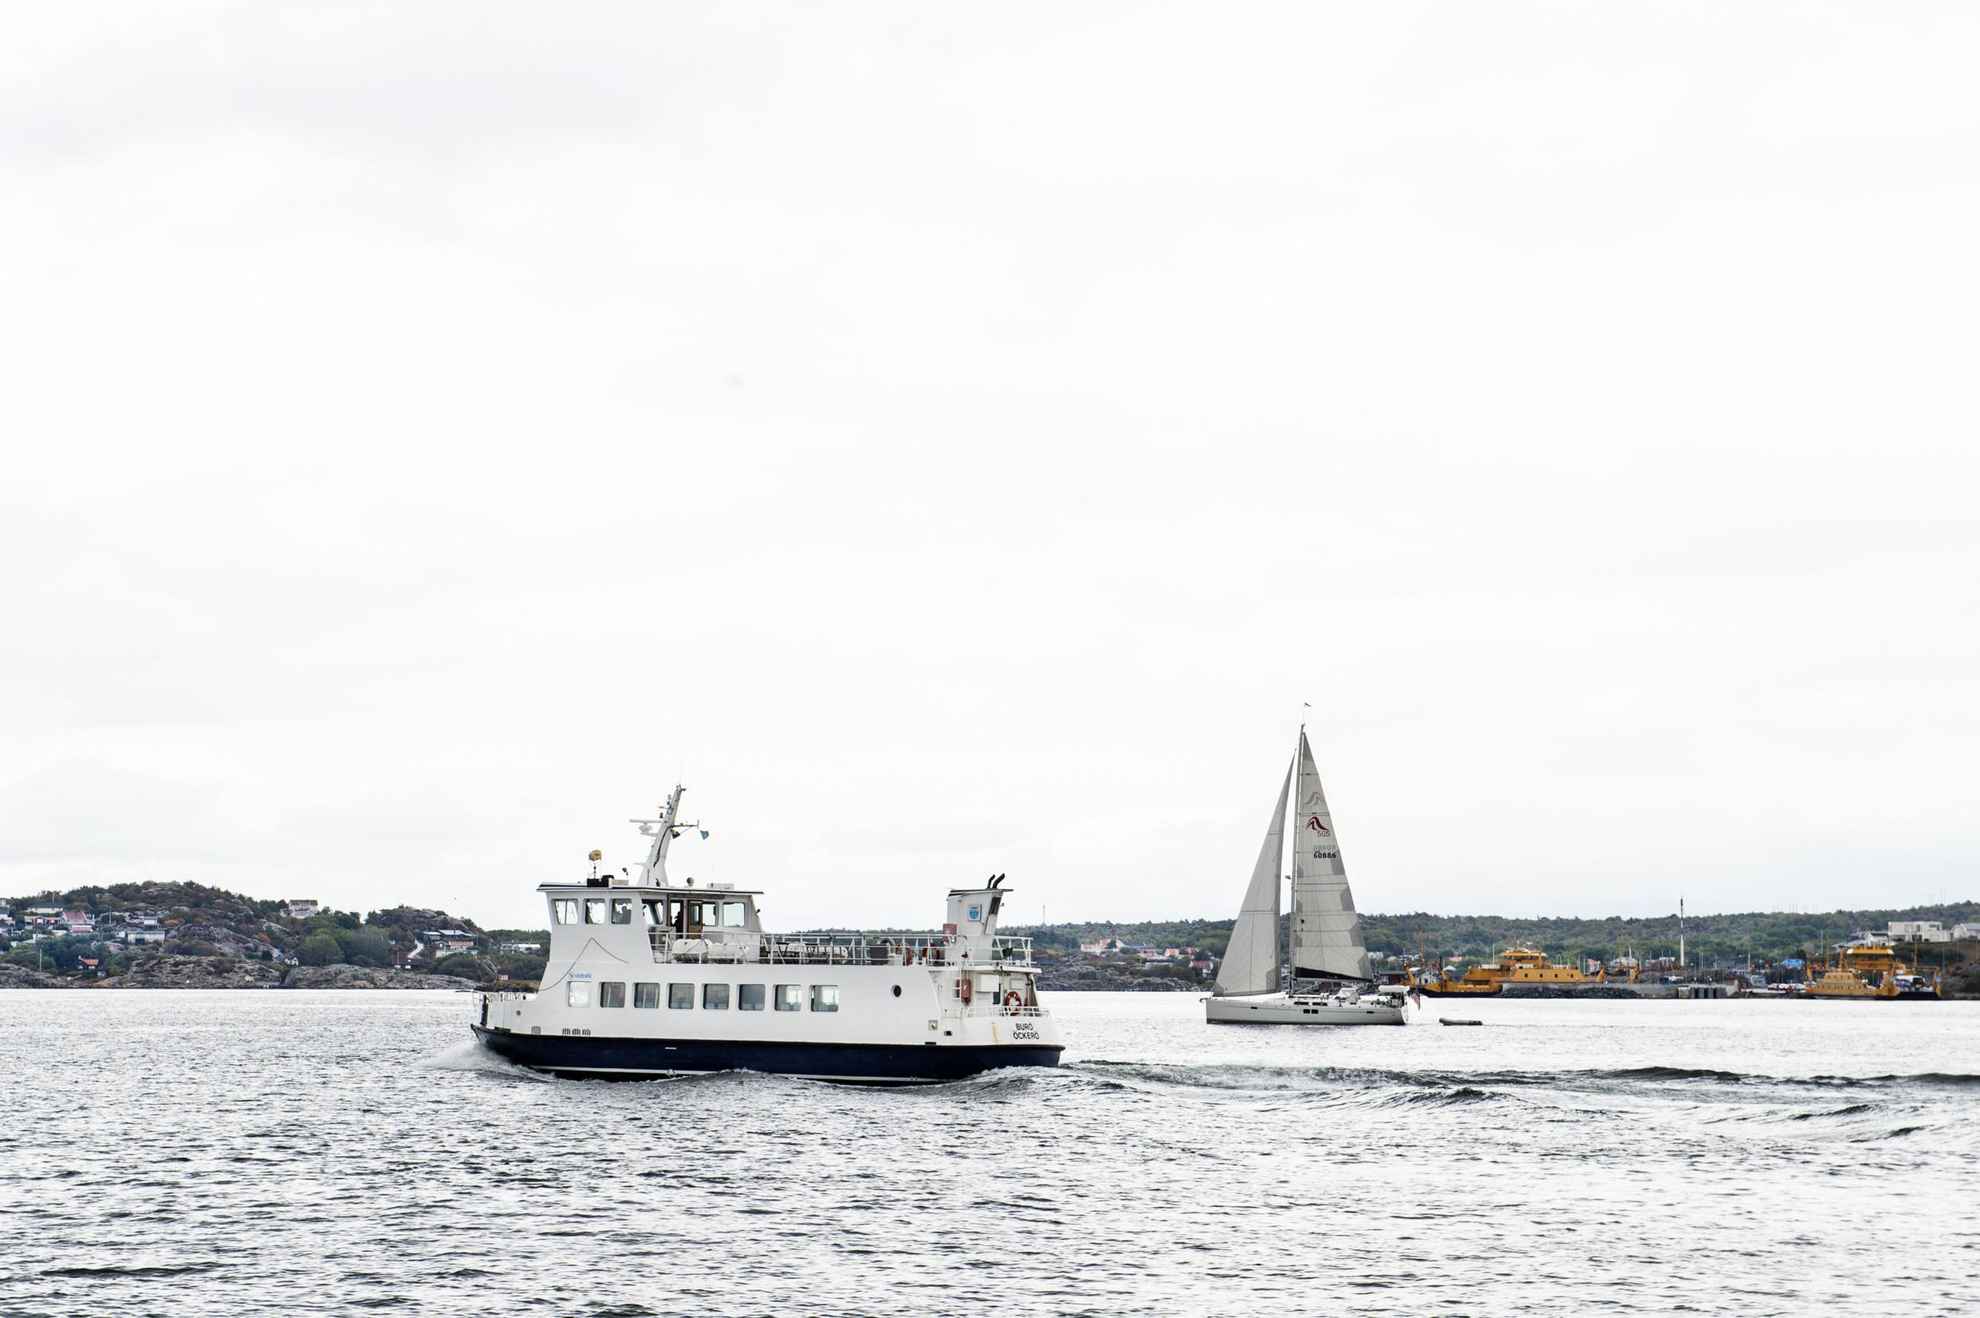 A small ferry and sailboat in the sea by an island outside Gothenburg.